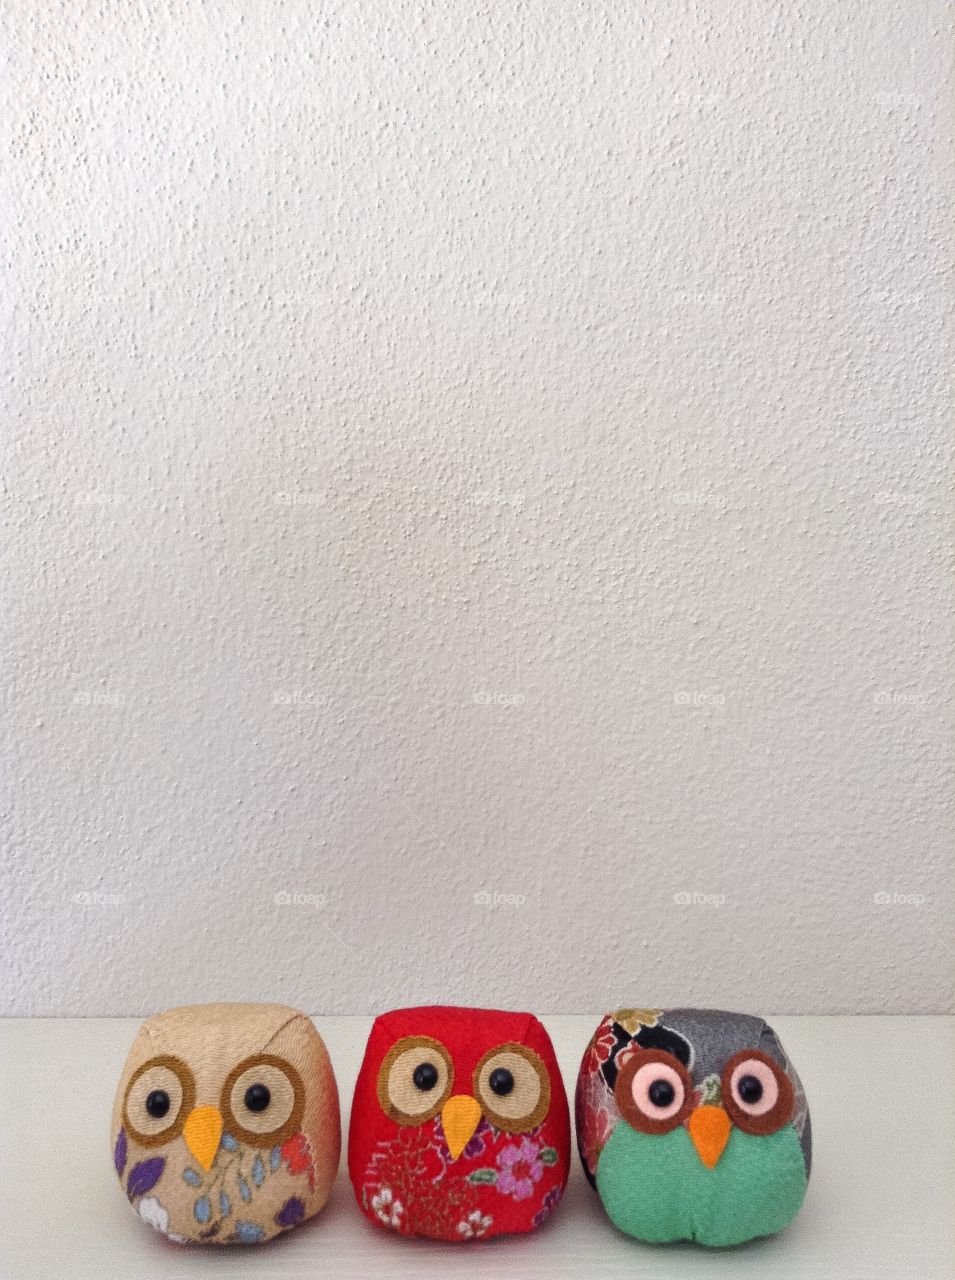 Owls from Japan
